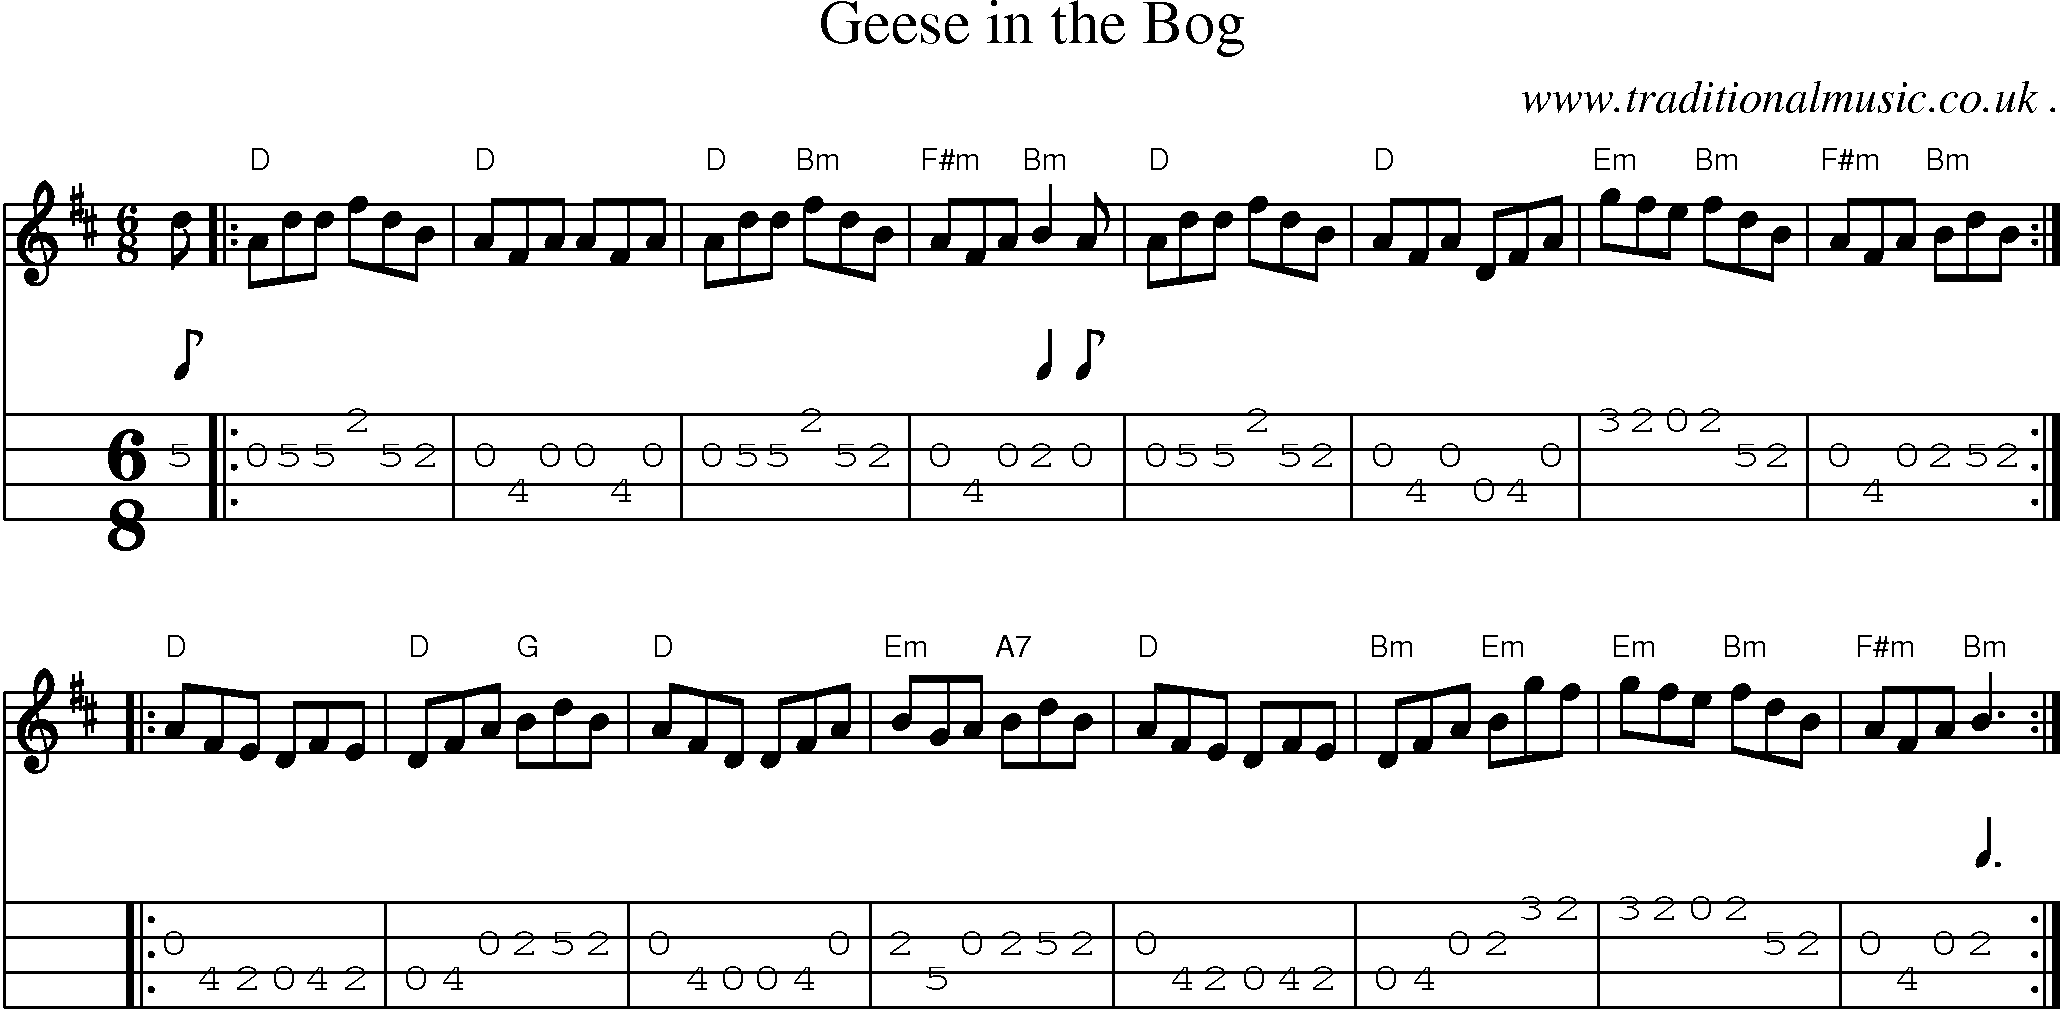 Sheet-music  score, Chords and Mandolin Tabs for Geese In The Bog